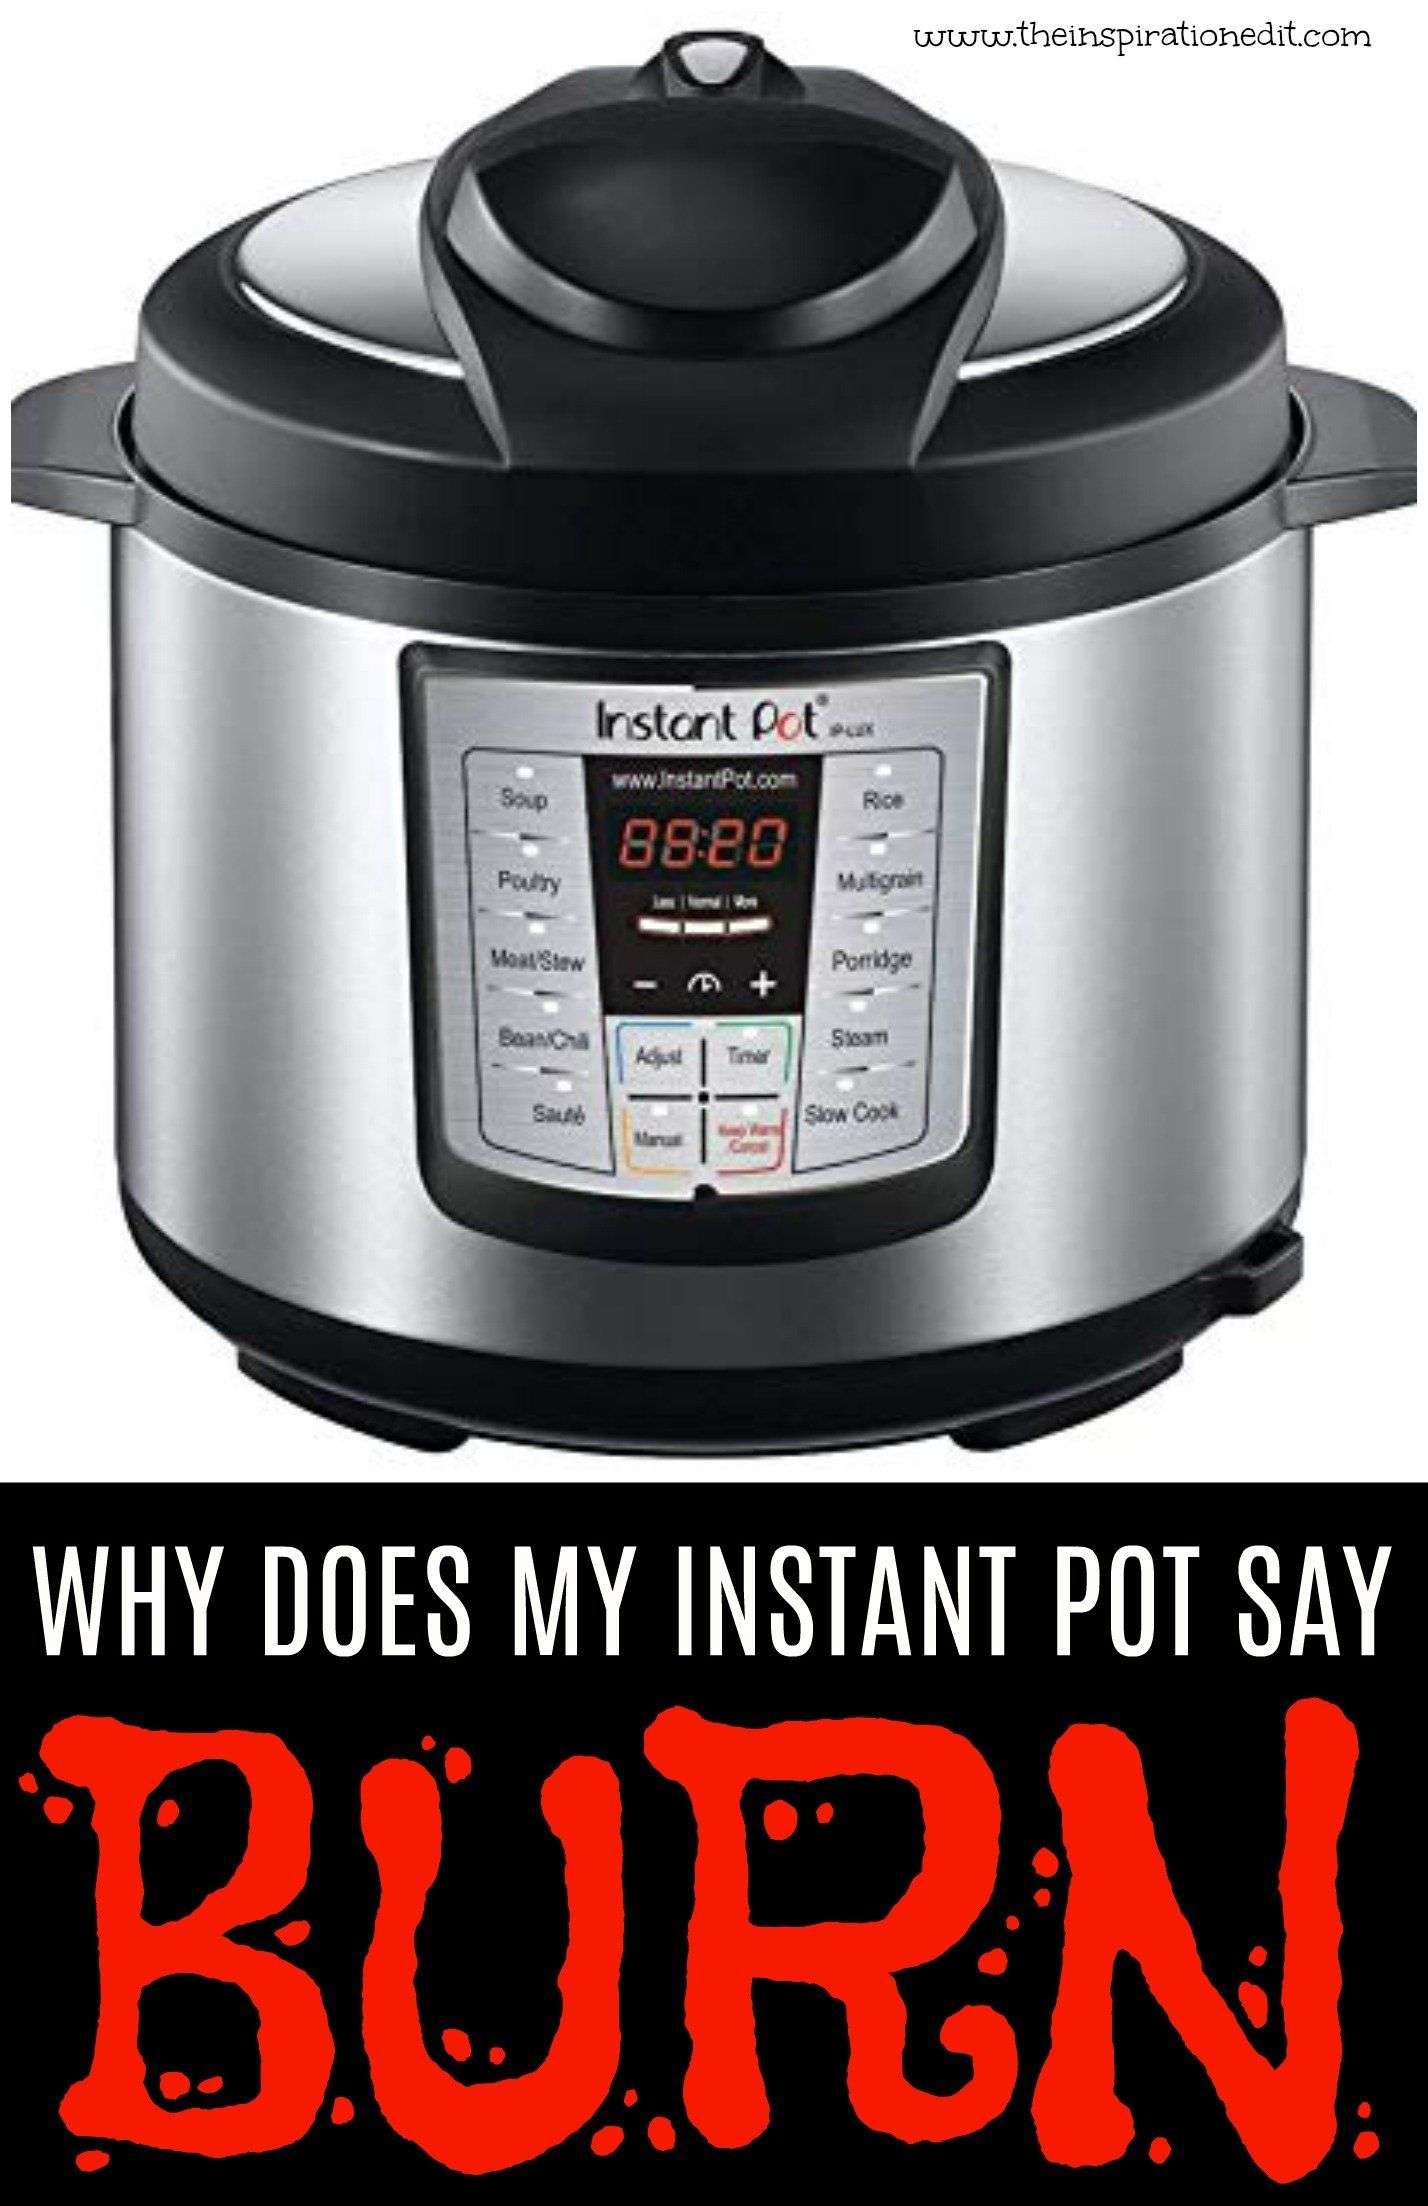 What Does the Instant Pot Burn Notice Mean?